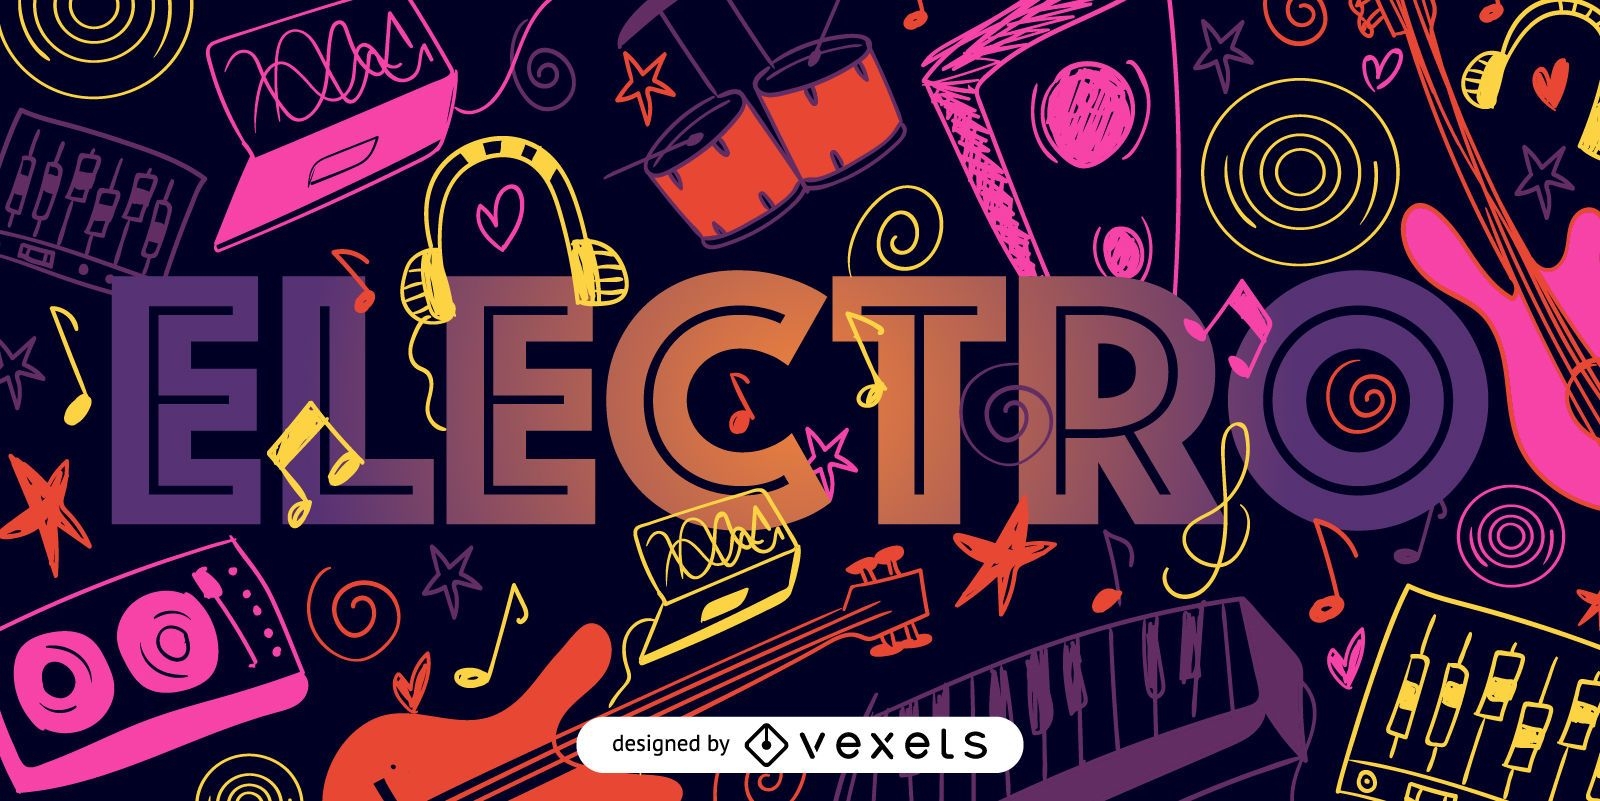 Electro music illustrated poster